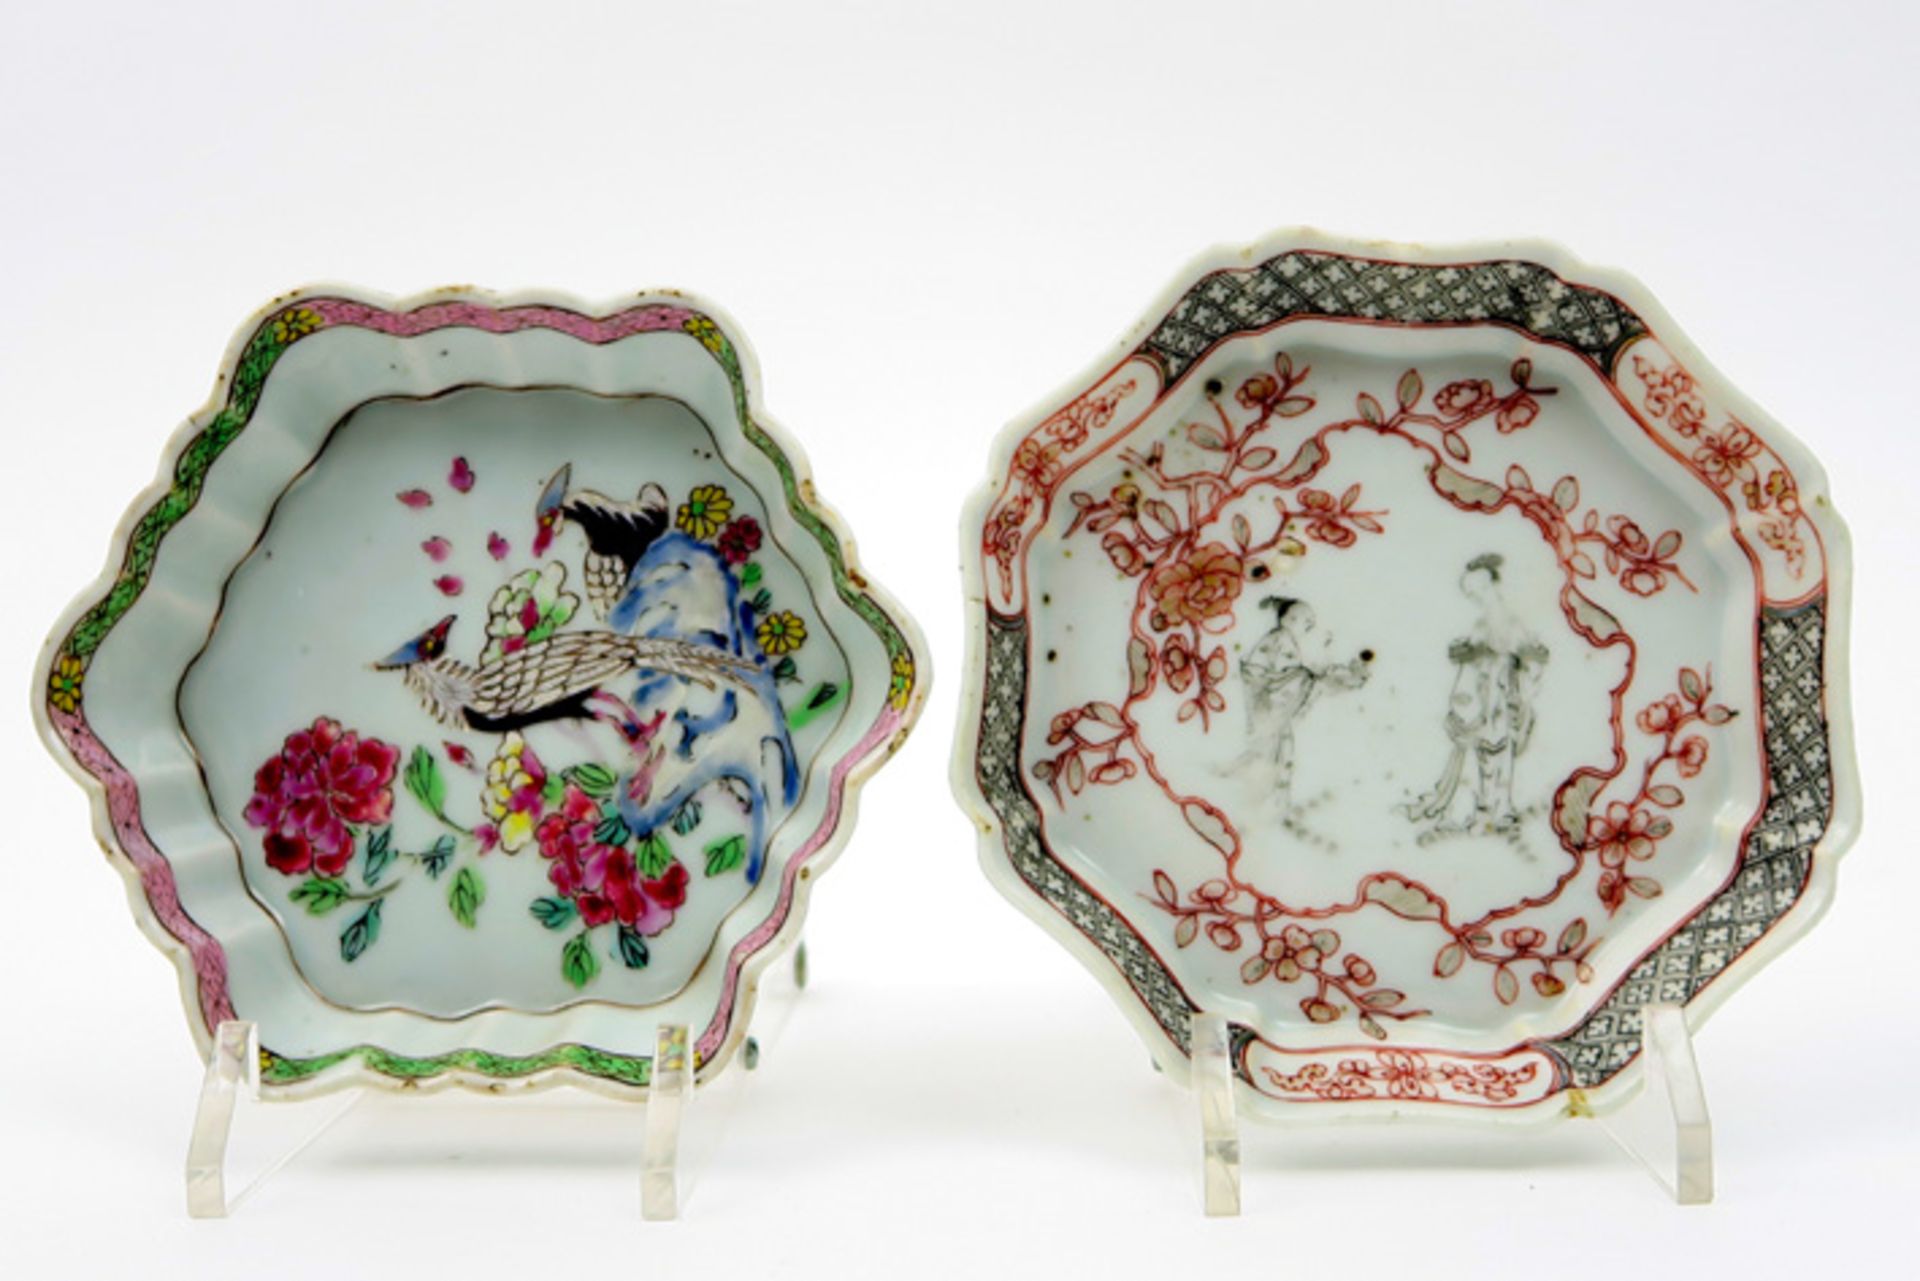 two hexagonal 18th Cent. Chinese "patti" dishes in porcelain Lot van twee zeshoekige achttiende